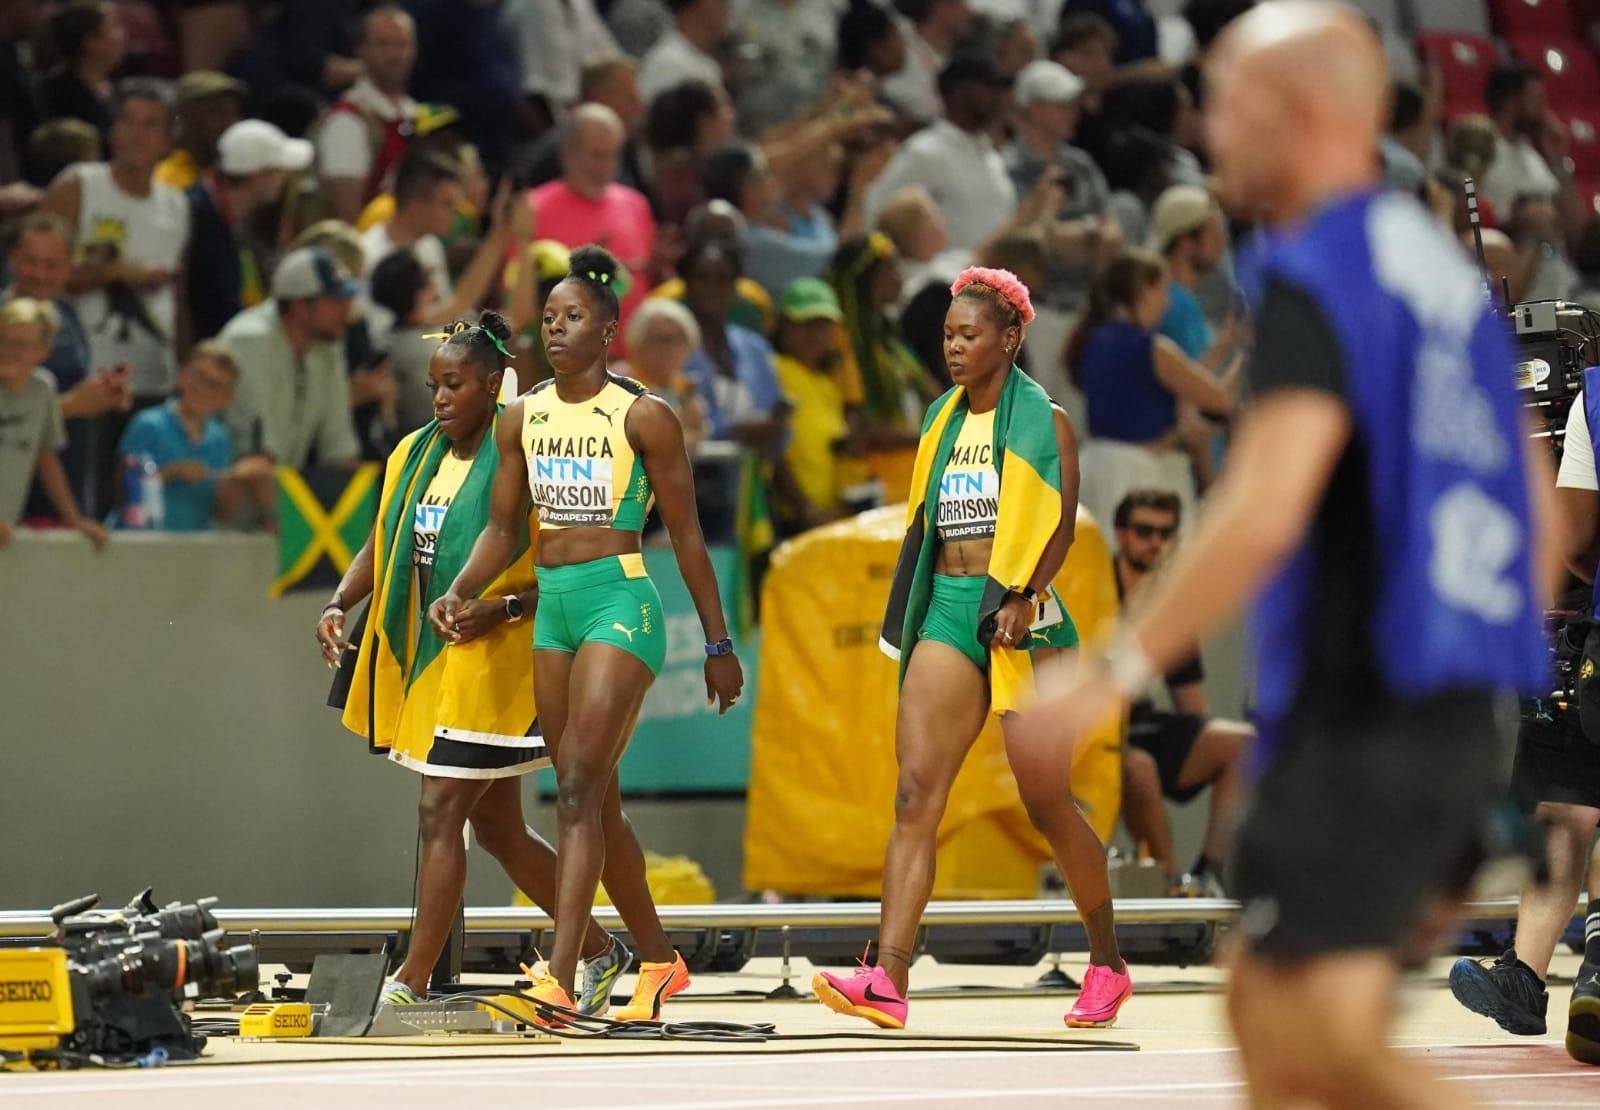 Jamaica women's 4x100m team after winning silver at the Budapest 2023 World Athletics